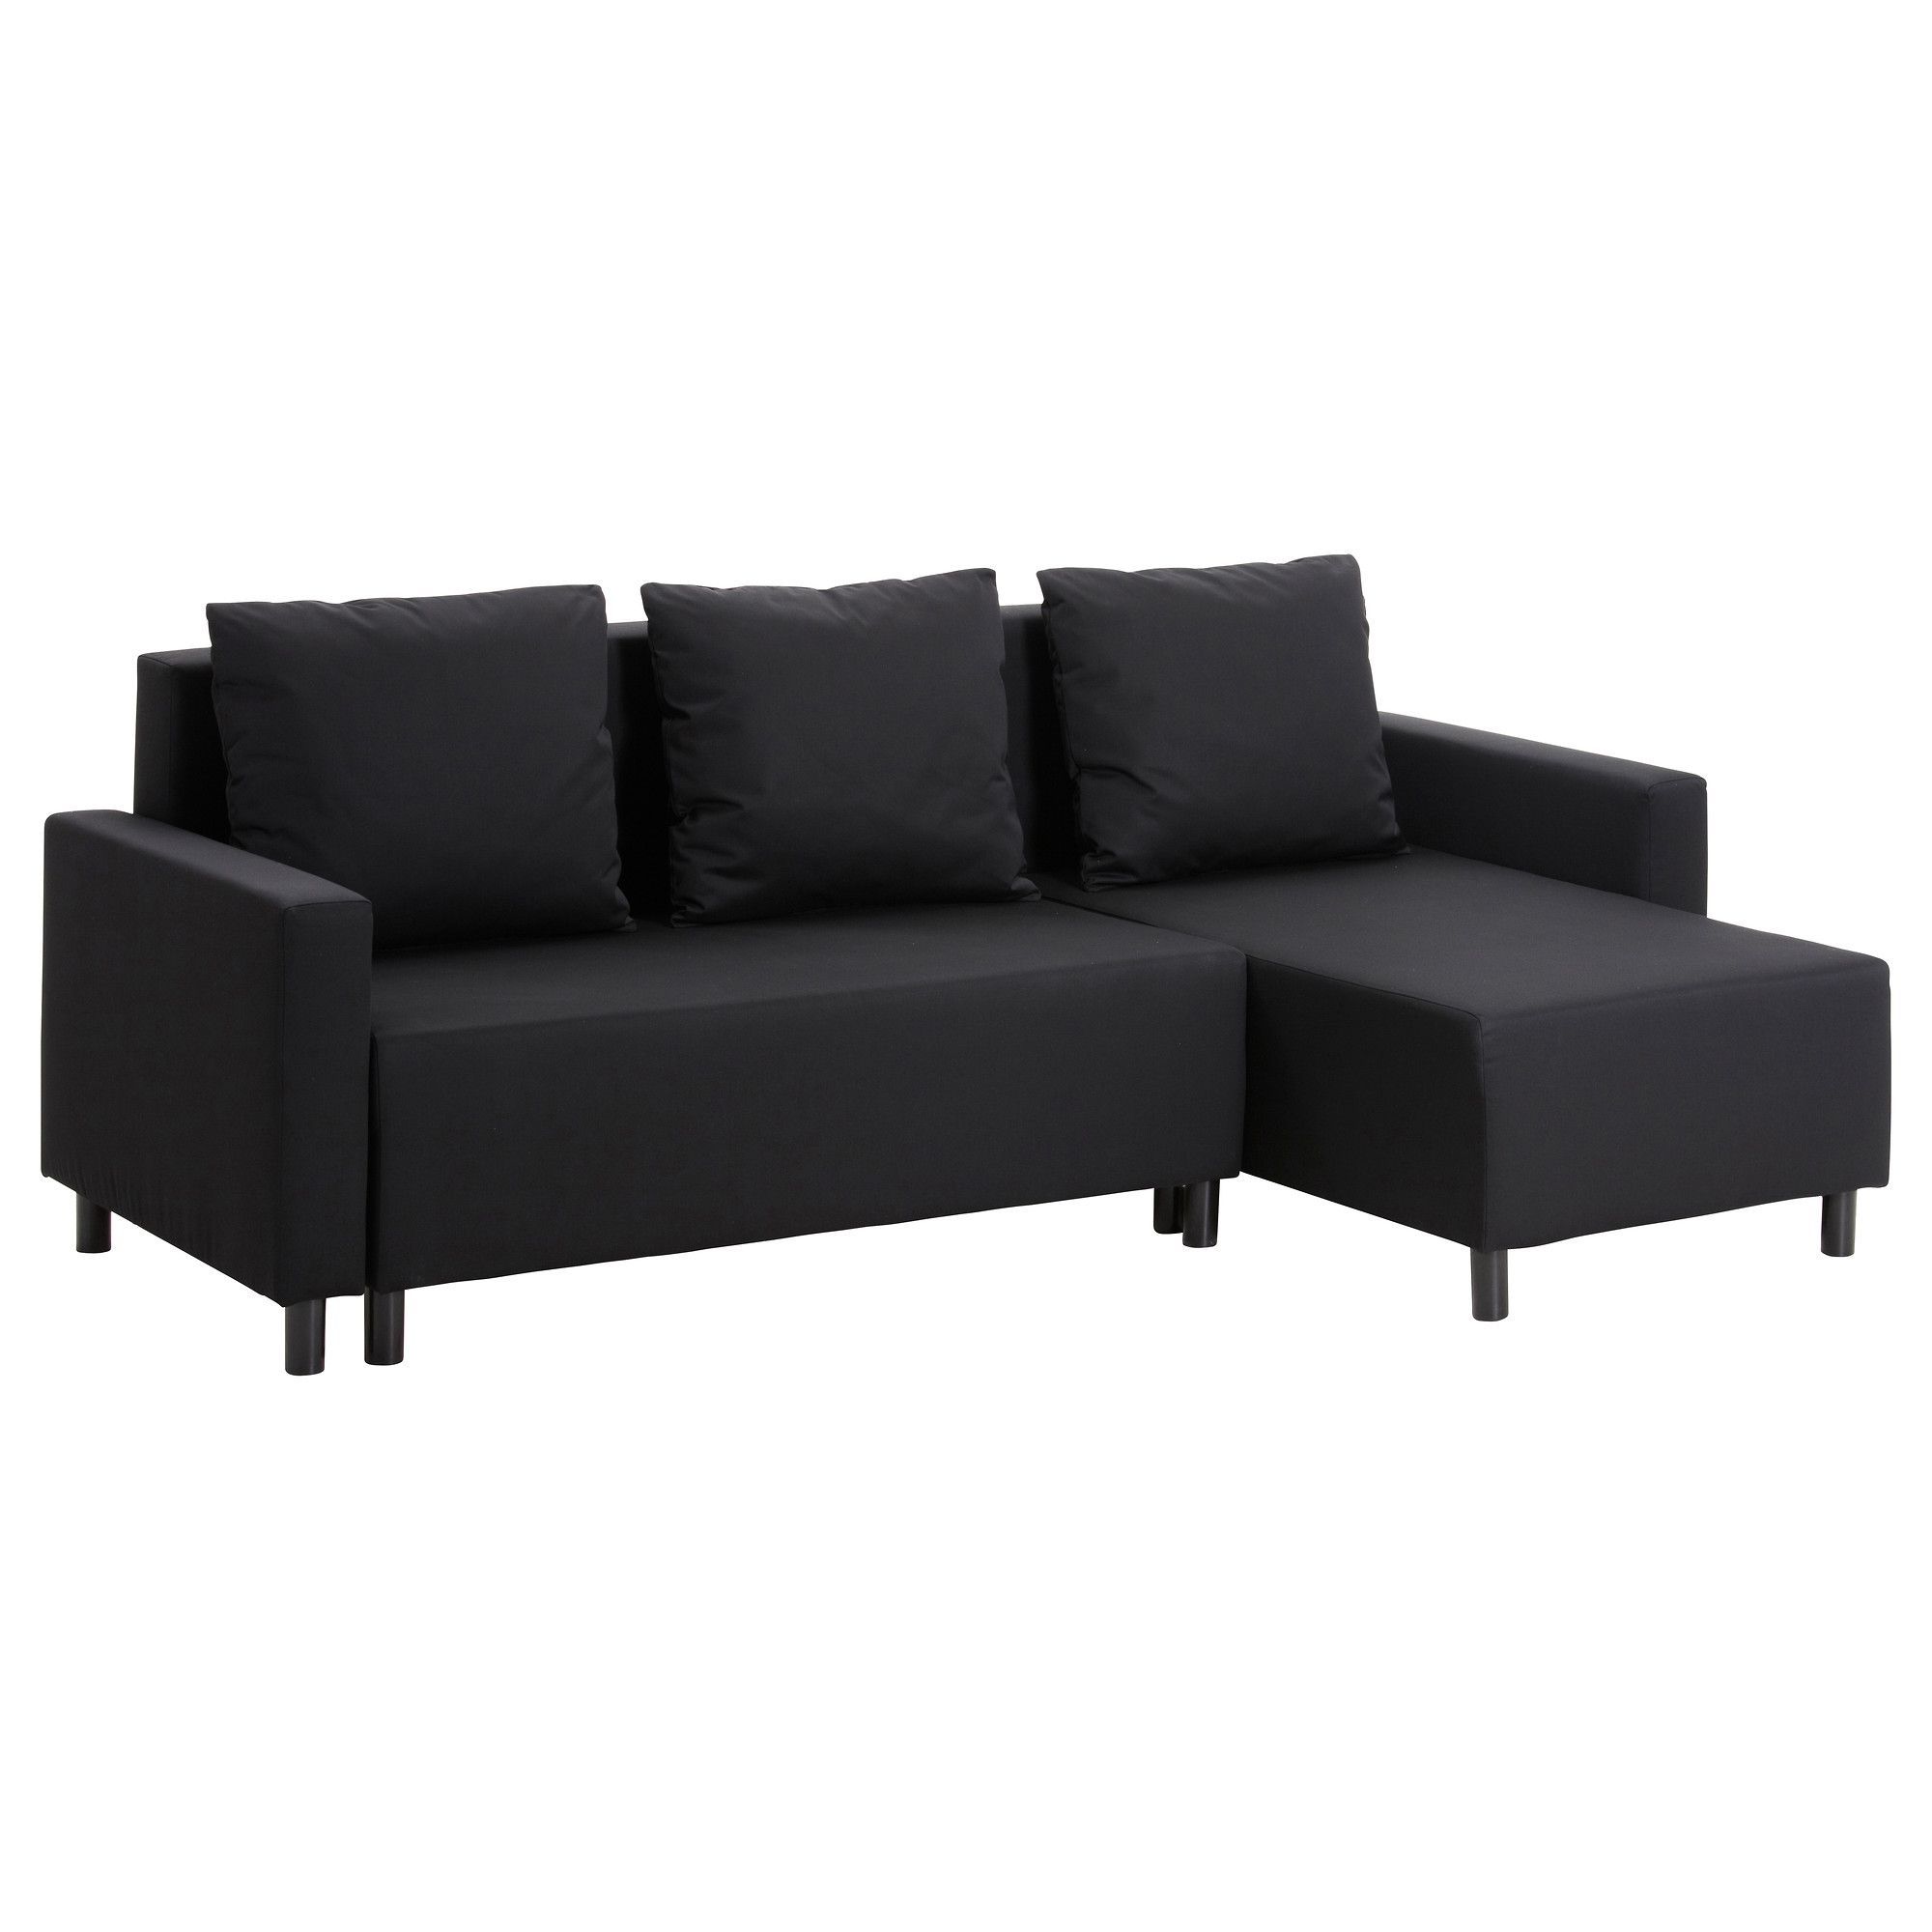 Most Up To Date Lugnvik Sofa Bed With Chaise Lounge – Granån Black – Ikea Pertaining To Chaise Lounge Sofa Beds (View 11 of 15)